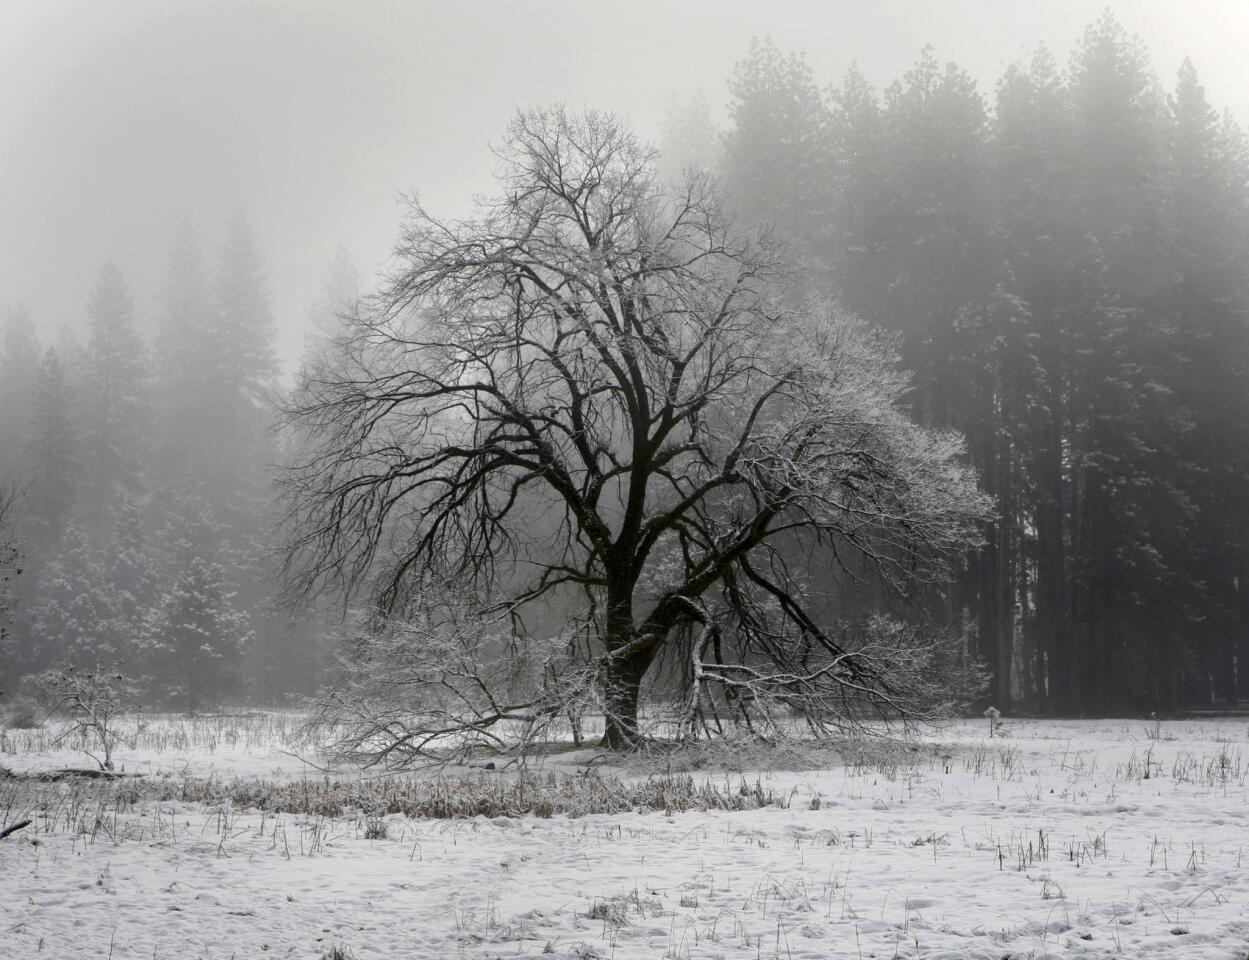 The iconic elm tree in Cook's Meadow in Yosemite Valley is shrouded by fog and fresh snow. Read Mark Boster's story on winter in Yosemite.